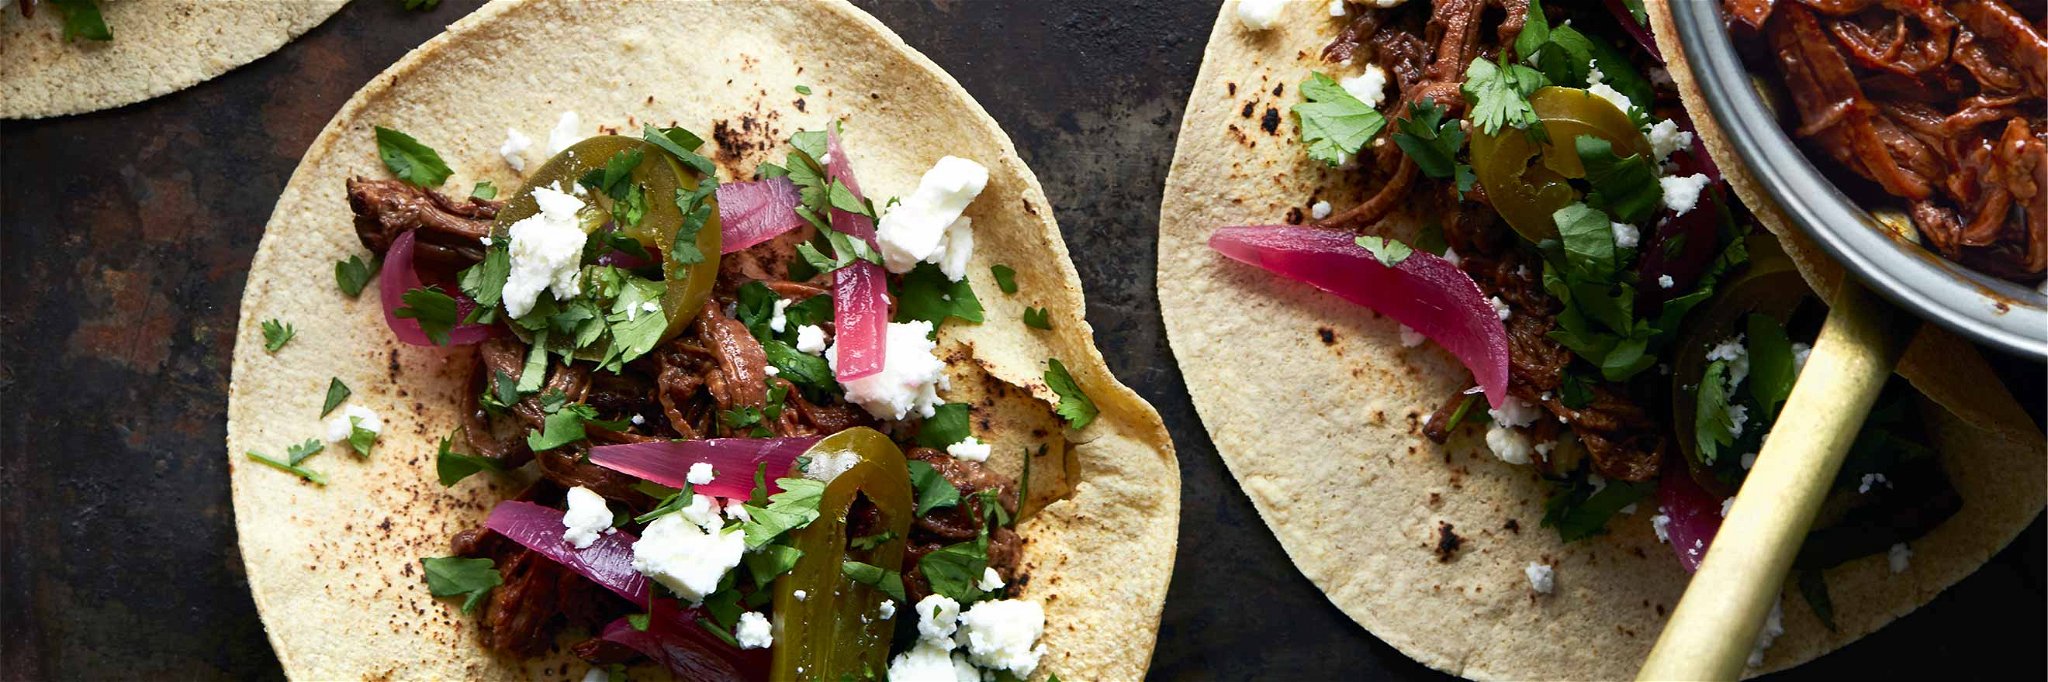 Tacos with Braised Beef and Chocolate